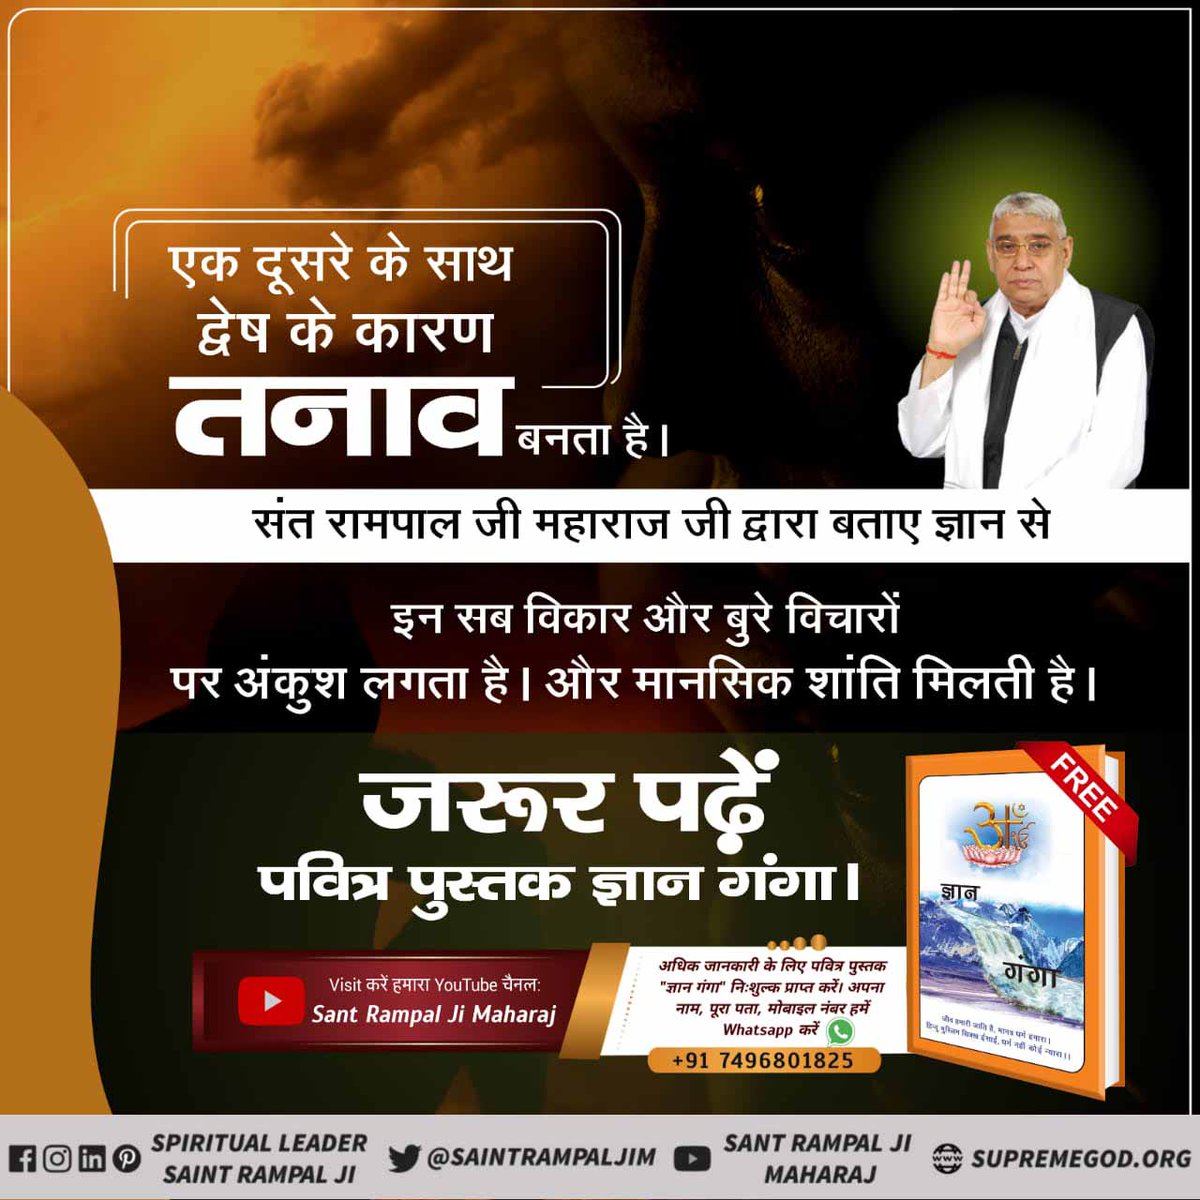 #मानसिक_शांति_नहींतो_कुछनहीं 
If you are looking for Sacred Books For InnerPeace — Here is the ultimate solution for you!
Must order free copies of most amazing books written by Supreme @SaintRampalJiM Ji 🙏🏻
These books include 100% authentic summary from our holy scriptures!